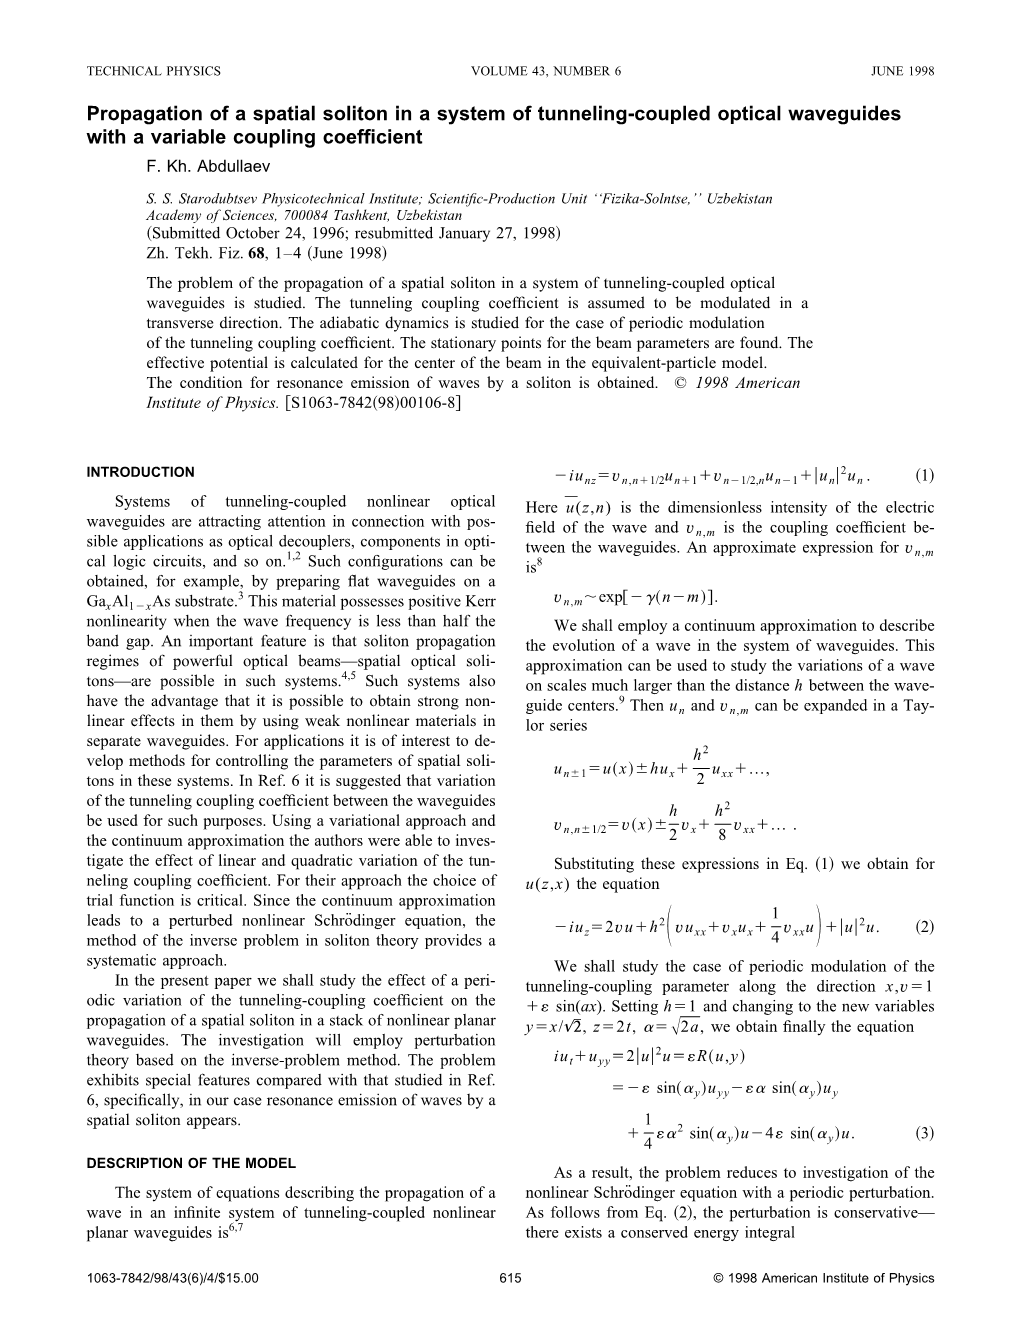 Propagation of a Spatial Soliton in a System of Tunneling-Coupled Optical Waveguides with a Variable Coupling Coefﬁcient F